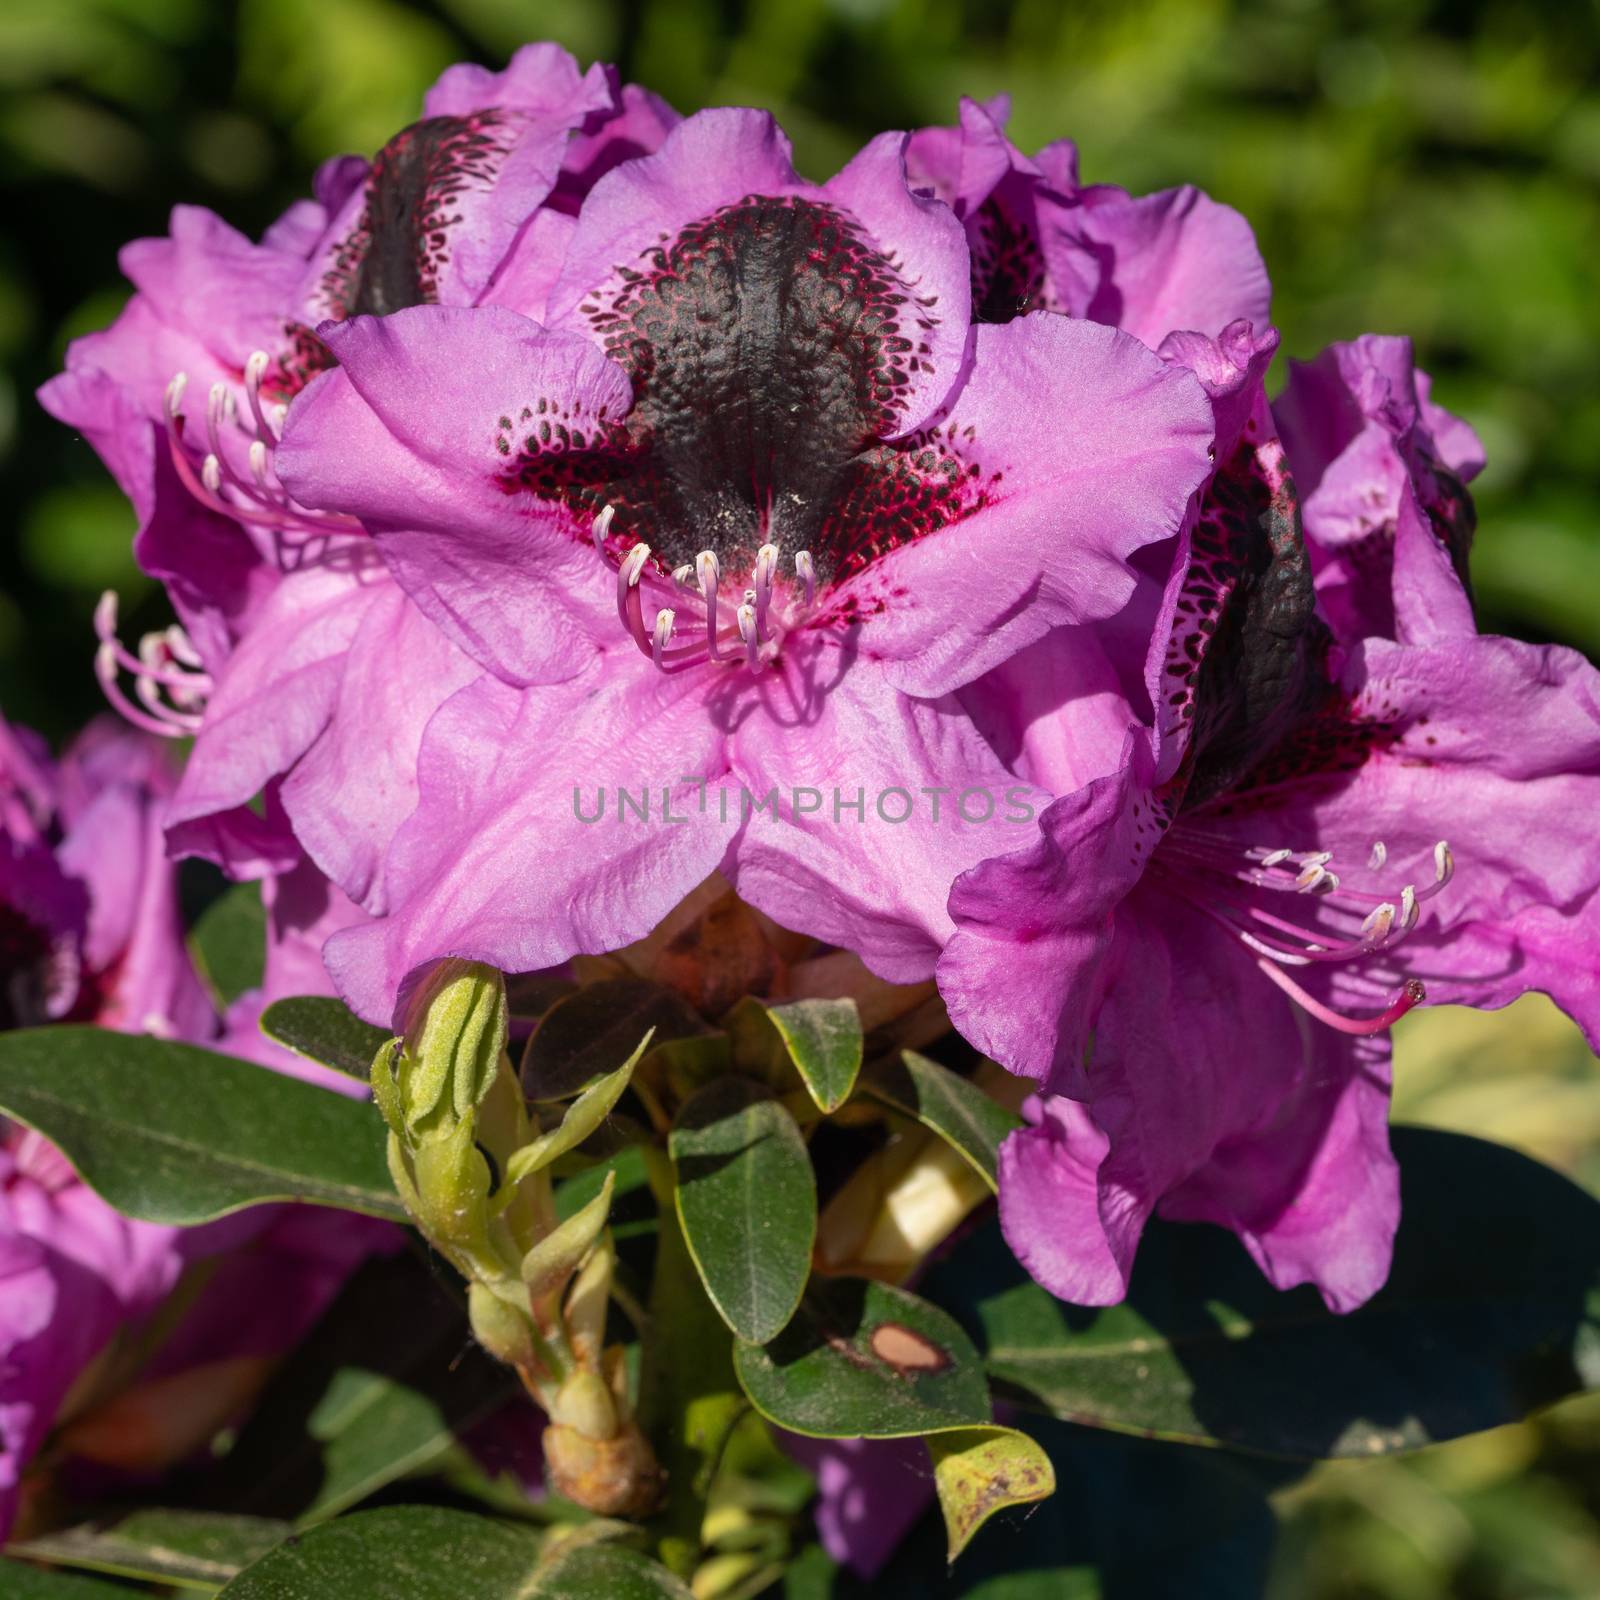 Rhododendron Hybrid Kangaroo (Rhododendron hybrid), close up of the flower head in sunshine